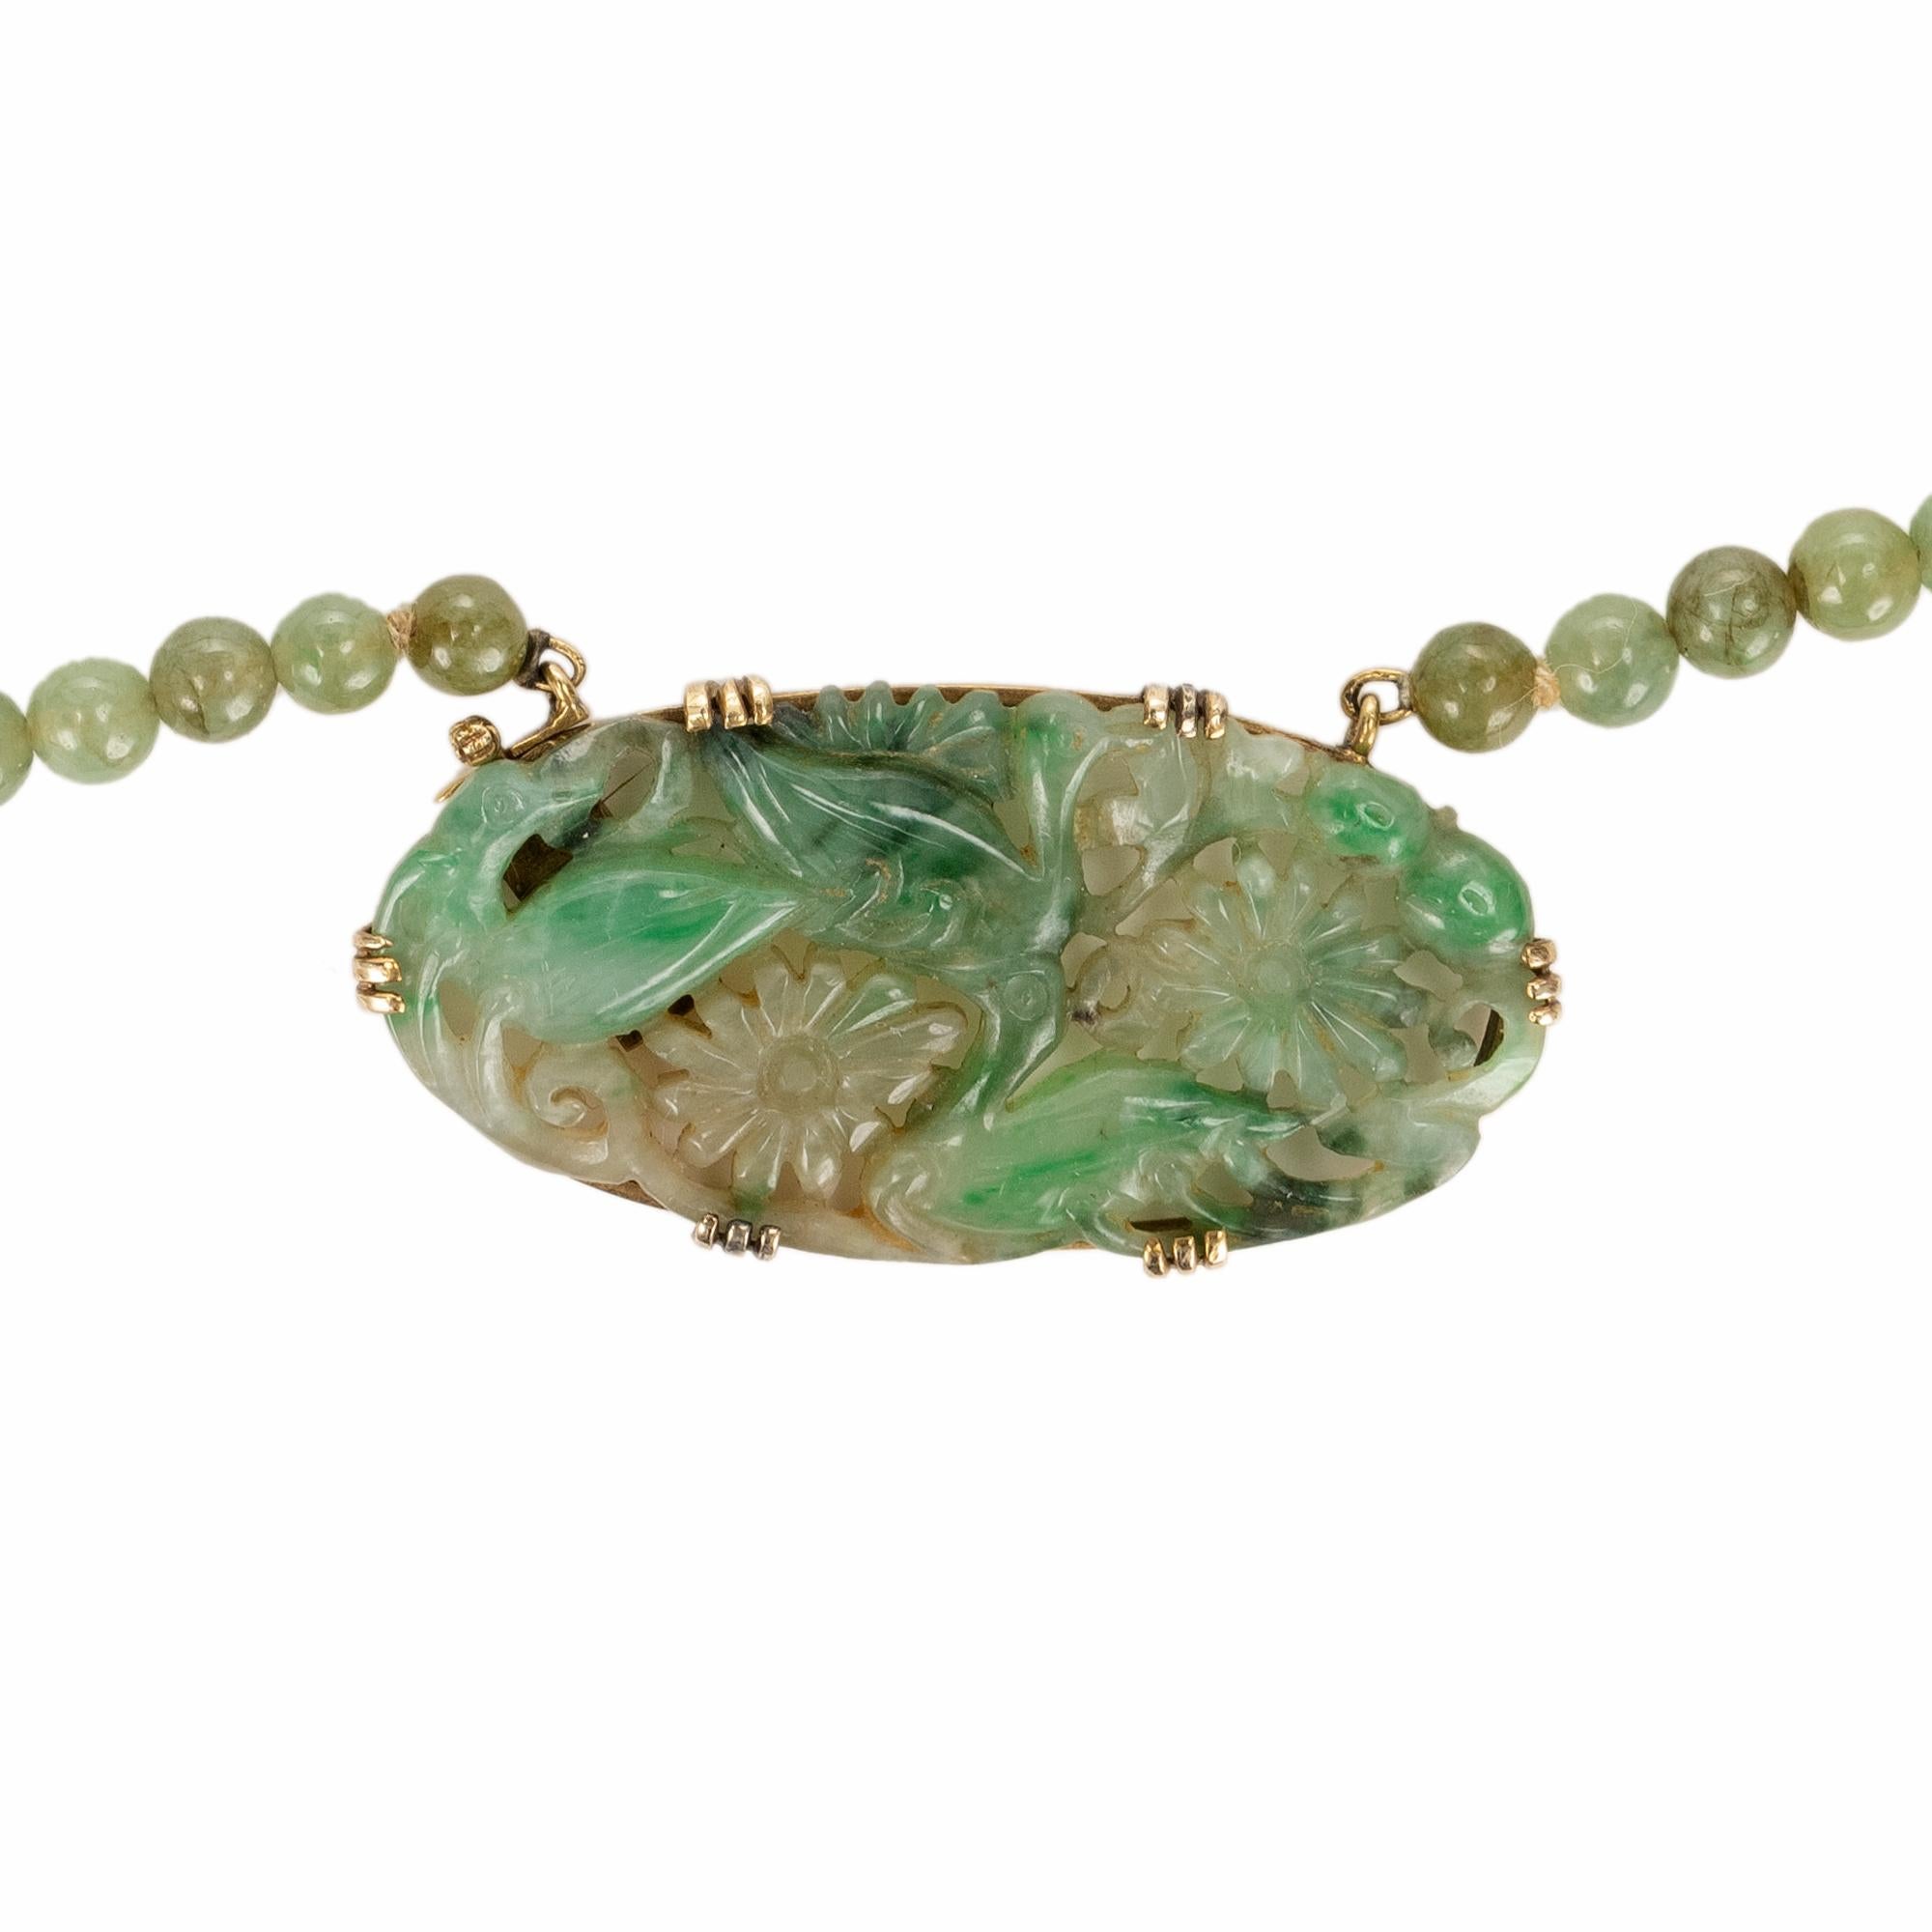 1950's GIA certified jadeite Jade graduated bead necklace with curved oval clasp and 14k gold settings 

1 pierced carving mottled grayish green jadeite jade, GIA Certificate # 2193985517
81 mottled grayish green jadeite jade beads 
Total Length: 20